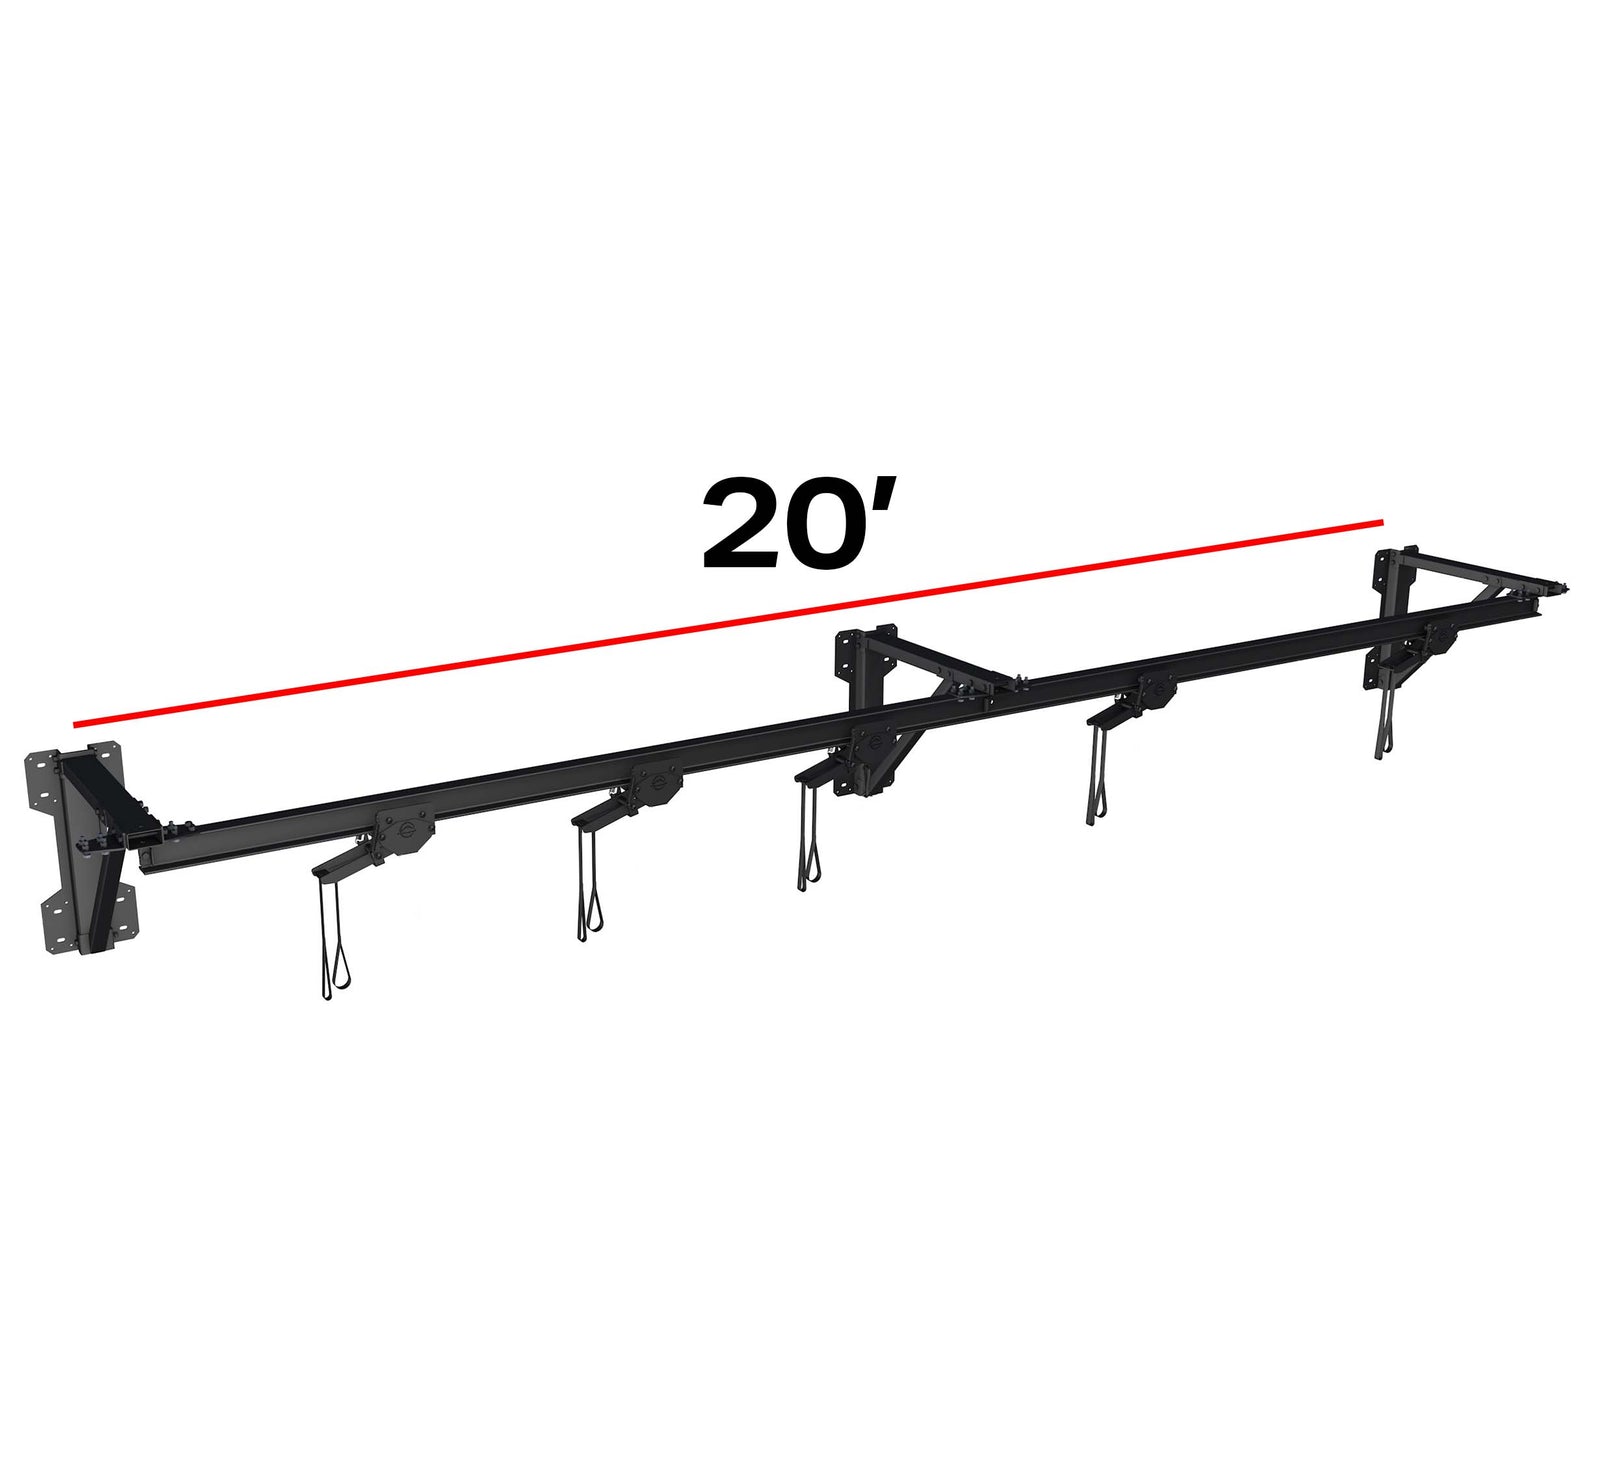 Trolley Bag Rack: Wall Mount 3.0 20' Section